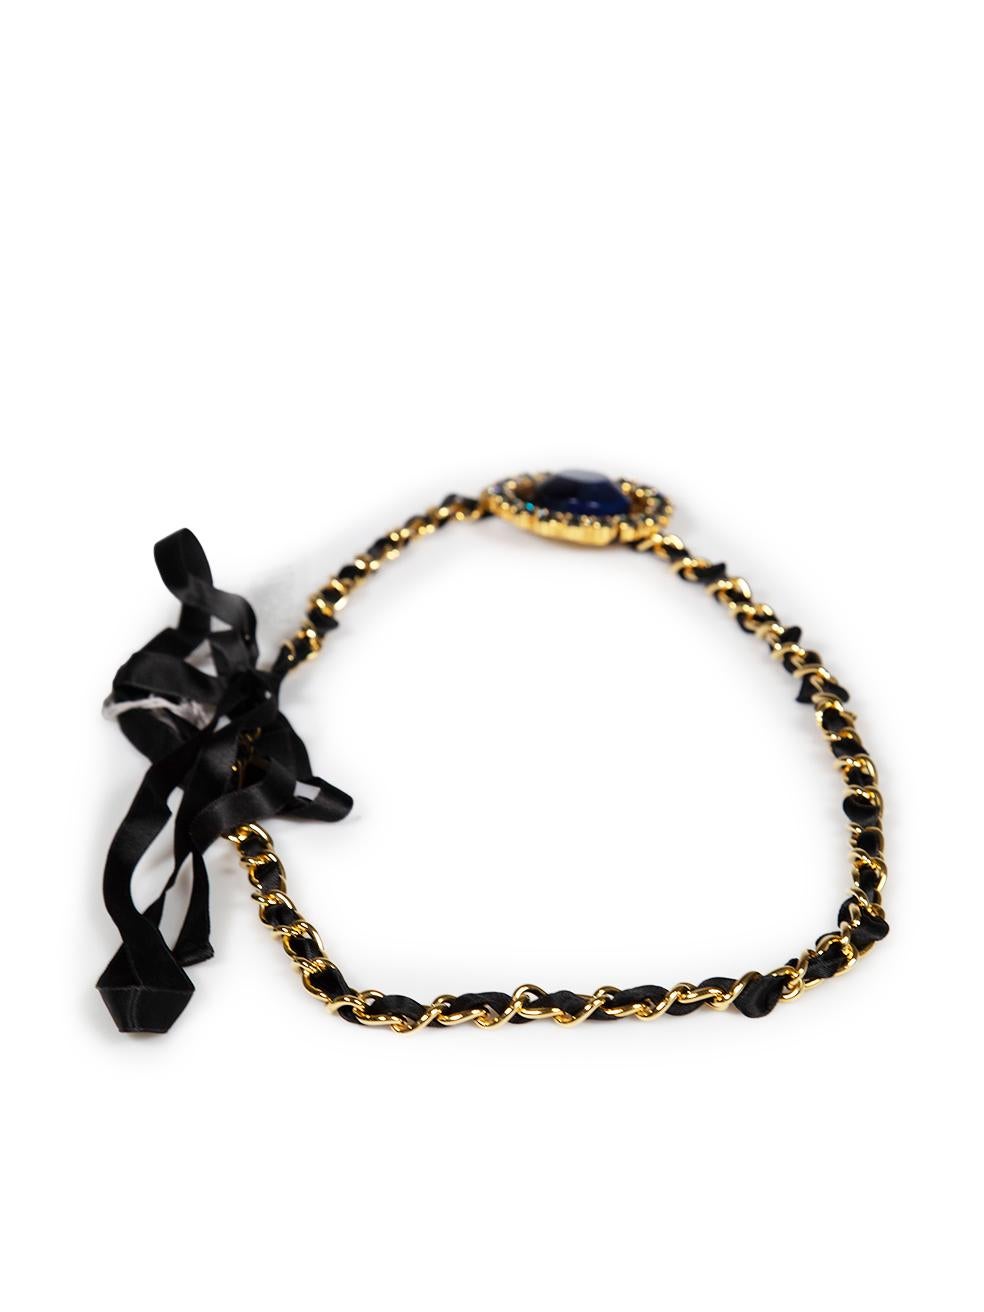 Marni Gold Embellished Chain Ribbon Tie Belt In Excellent Condition For Sale In London, GB